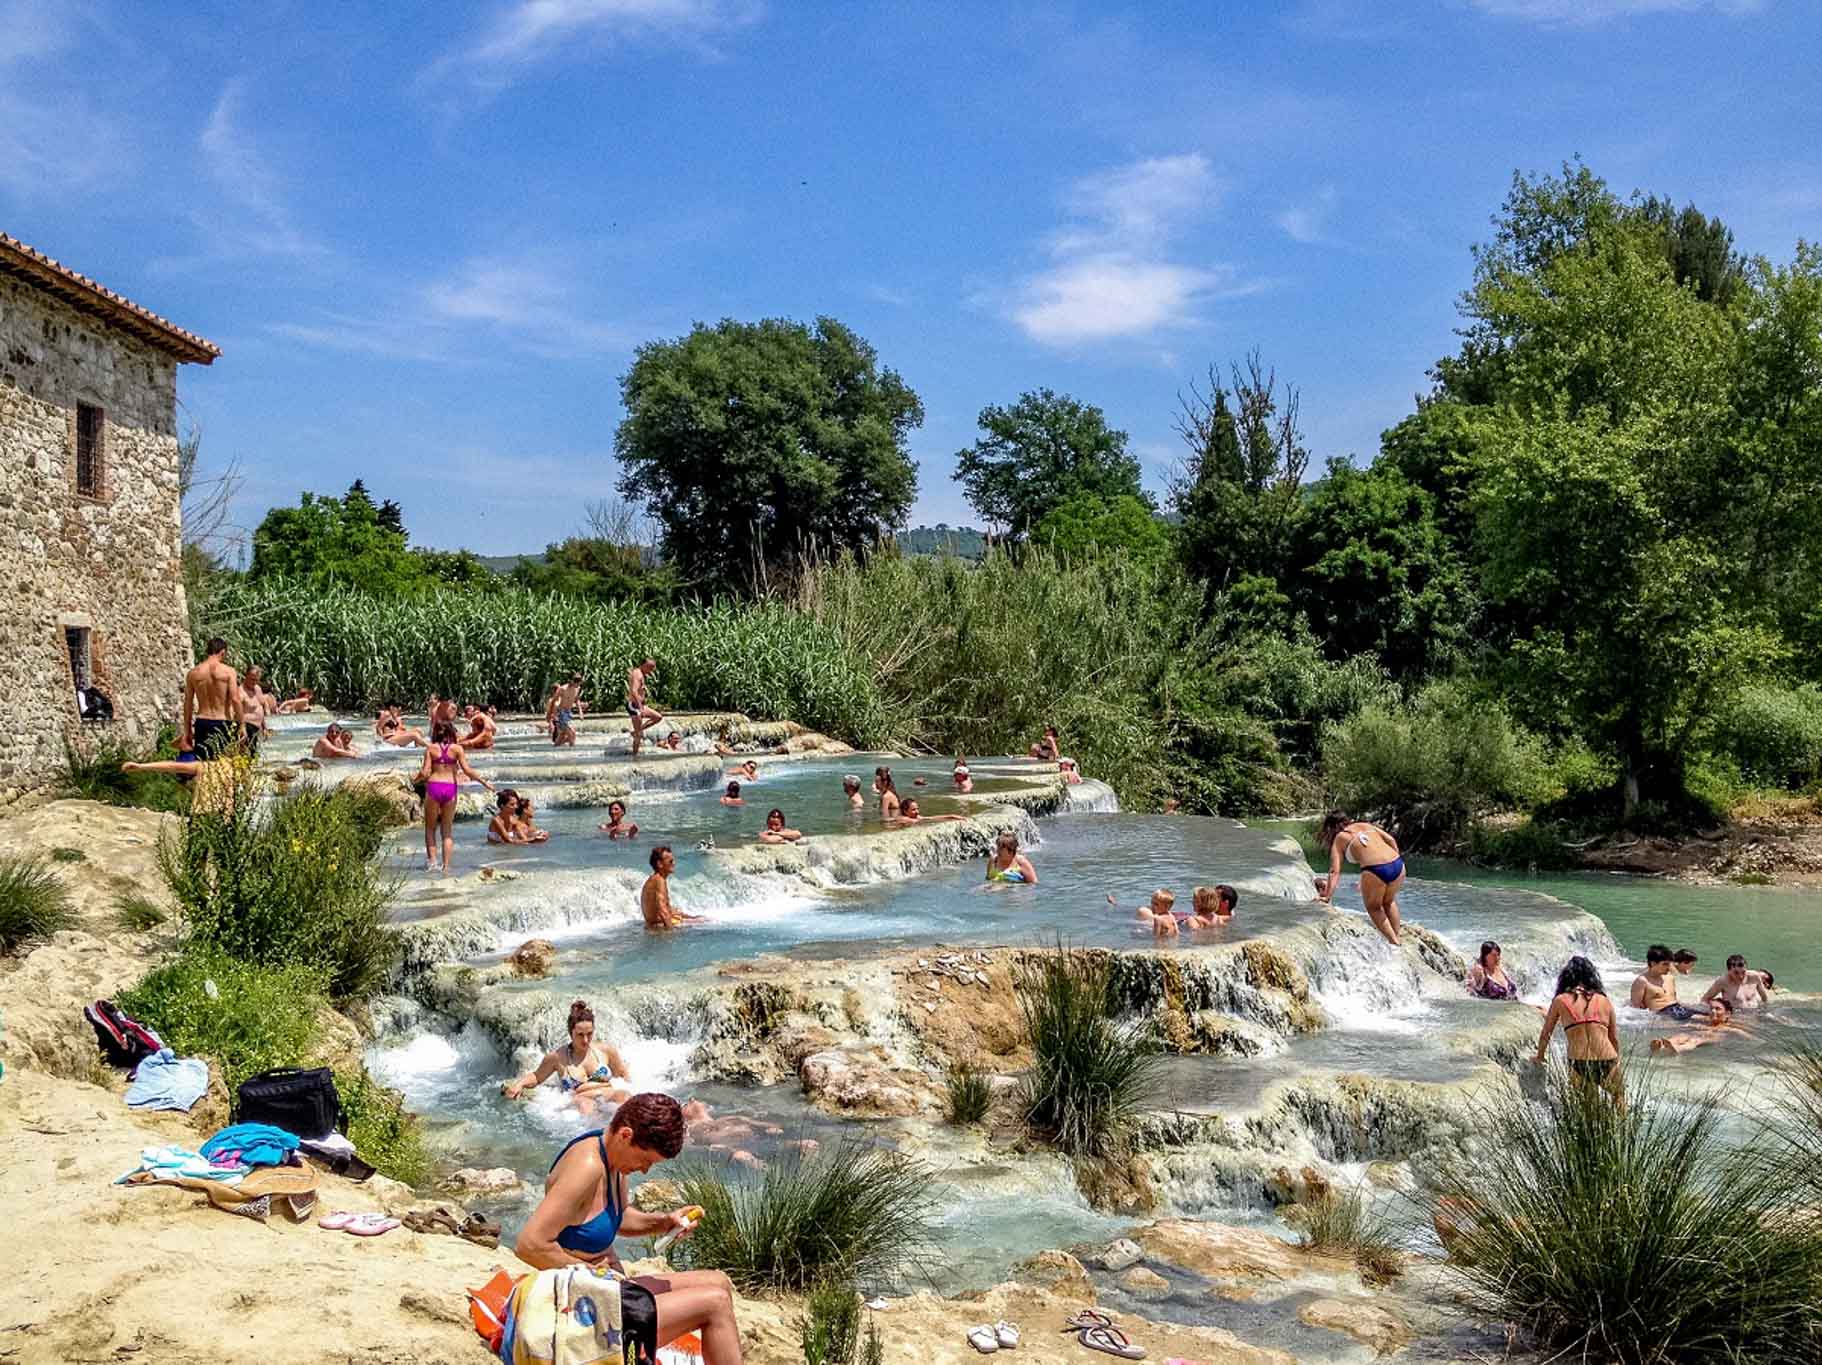 People swimming in natural pools